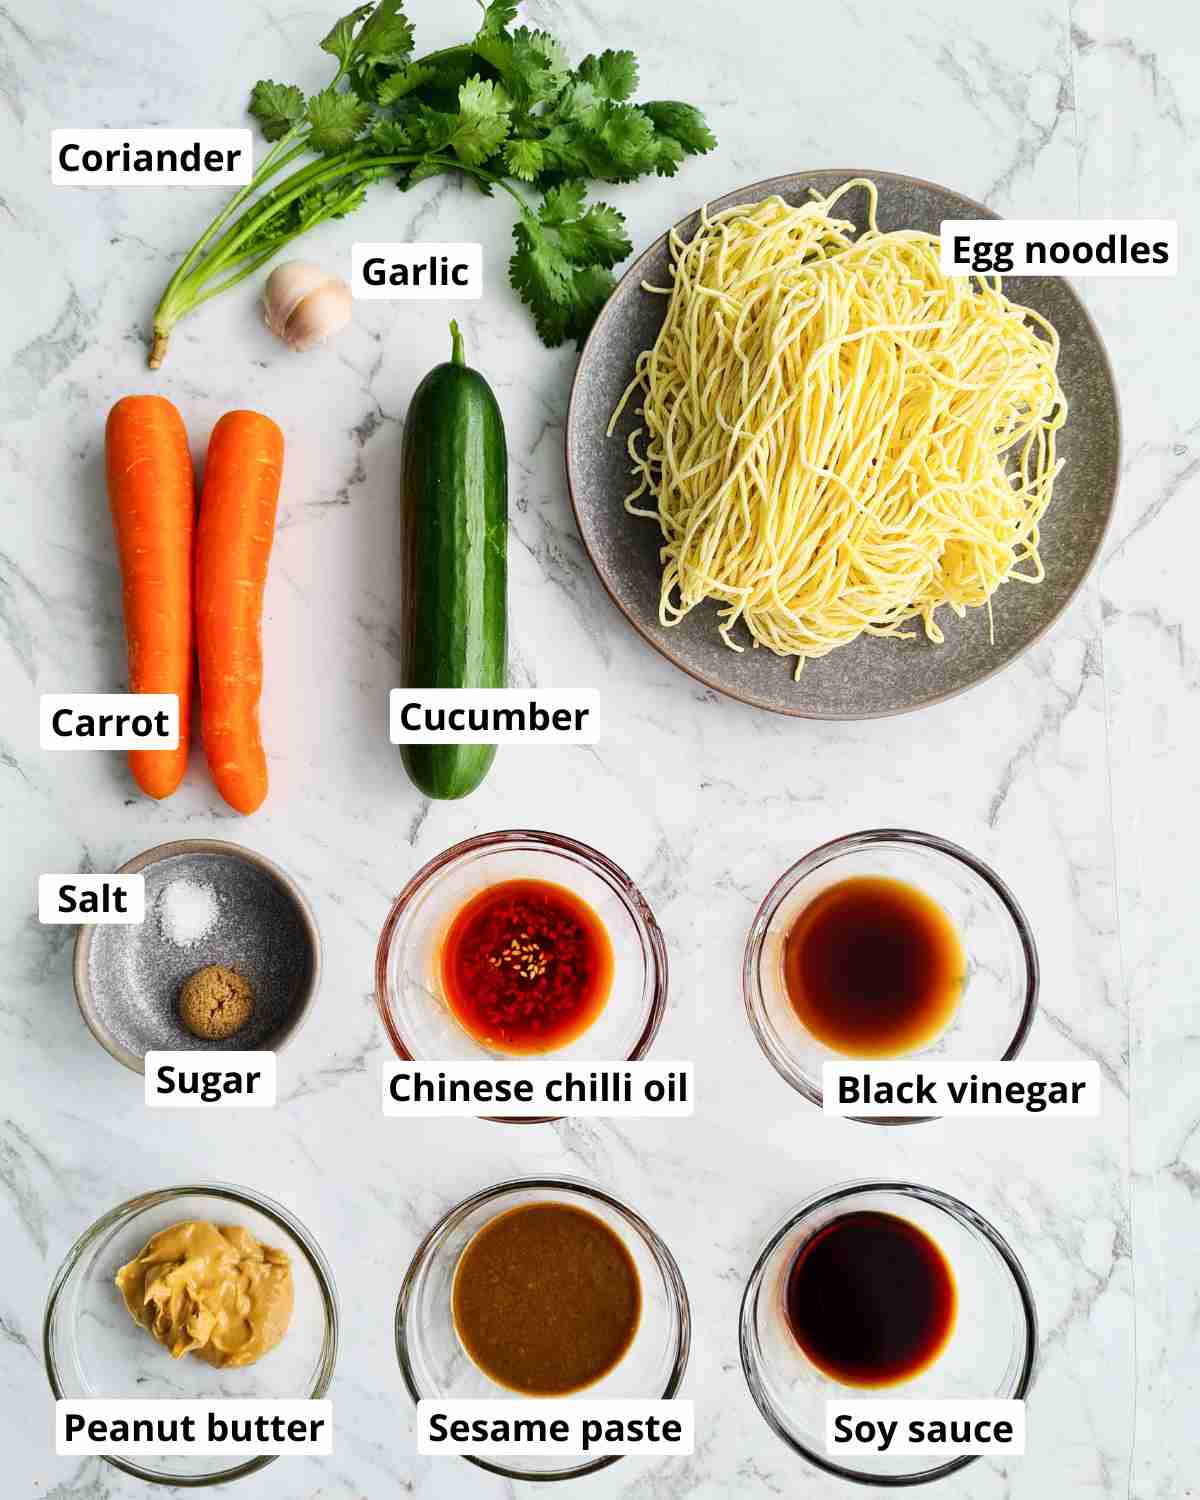 Ingredients required to make this recipe, labled